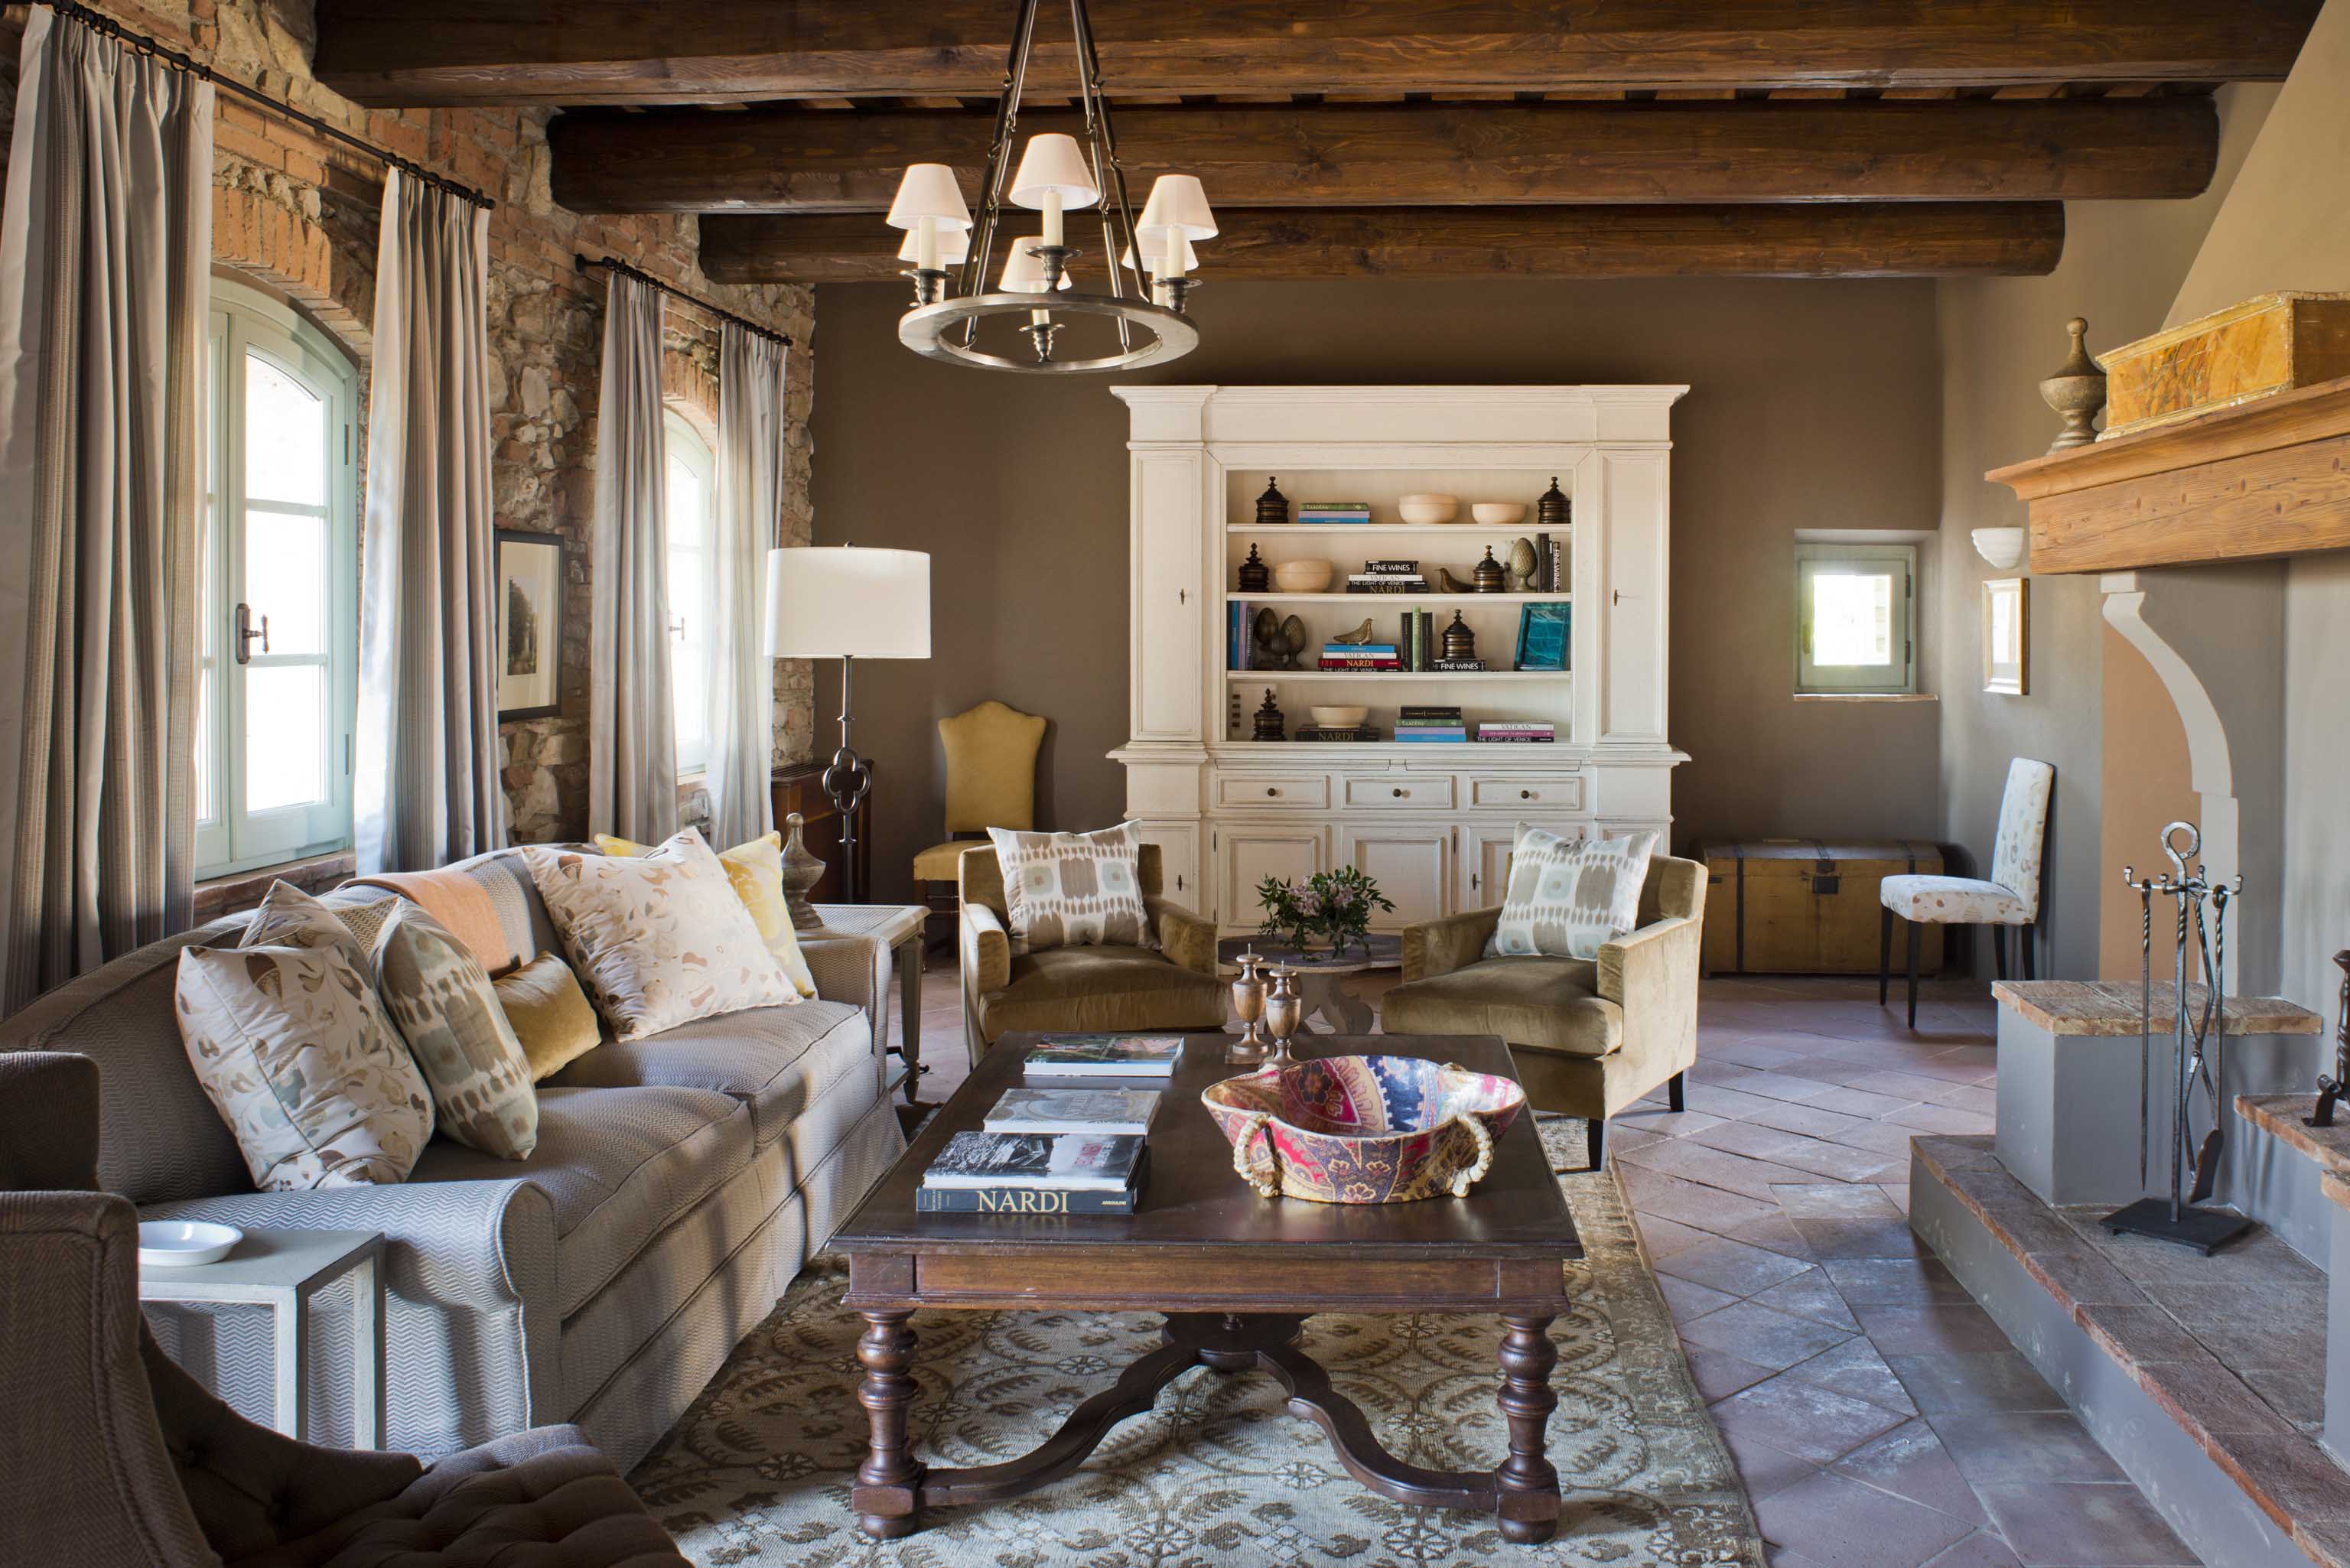 castello di casole interiors by j banks design group has a sophisticated Italian flair